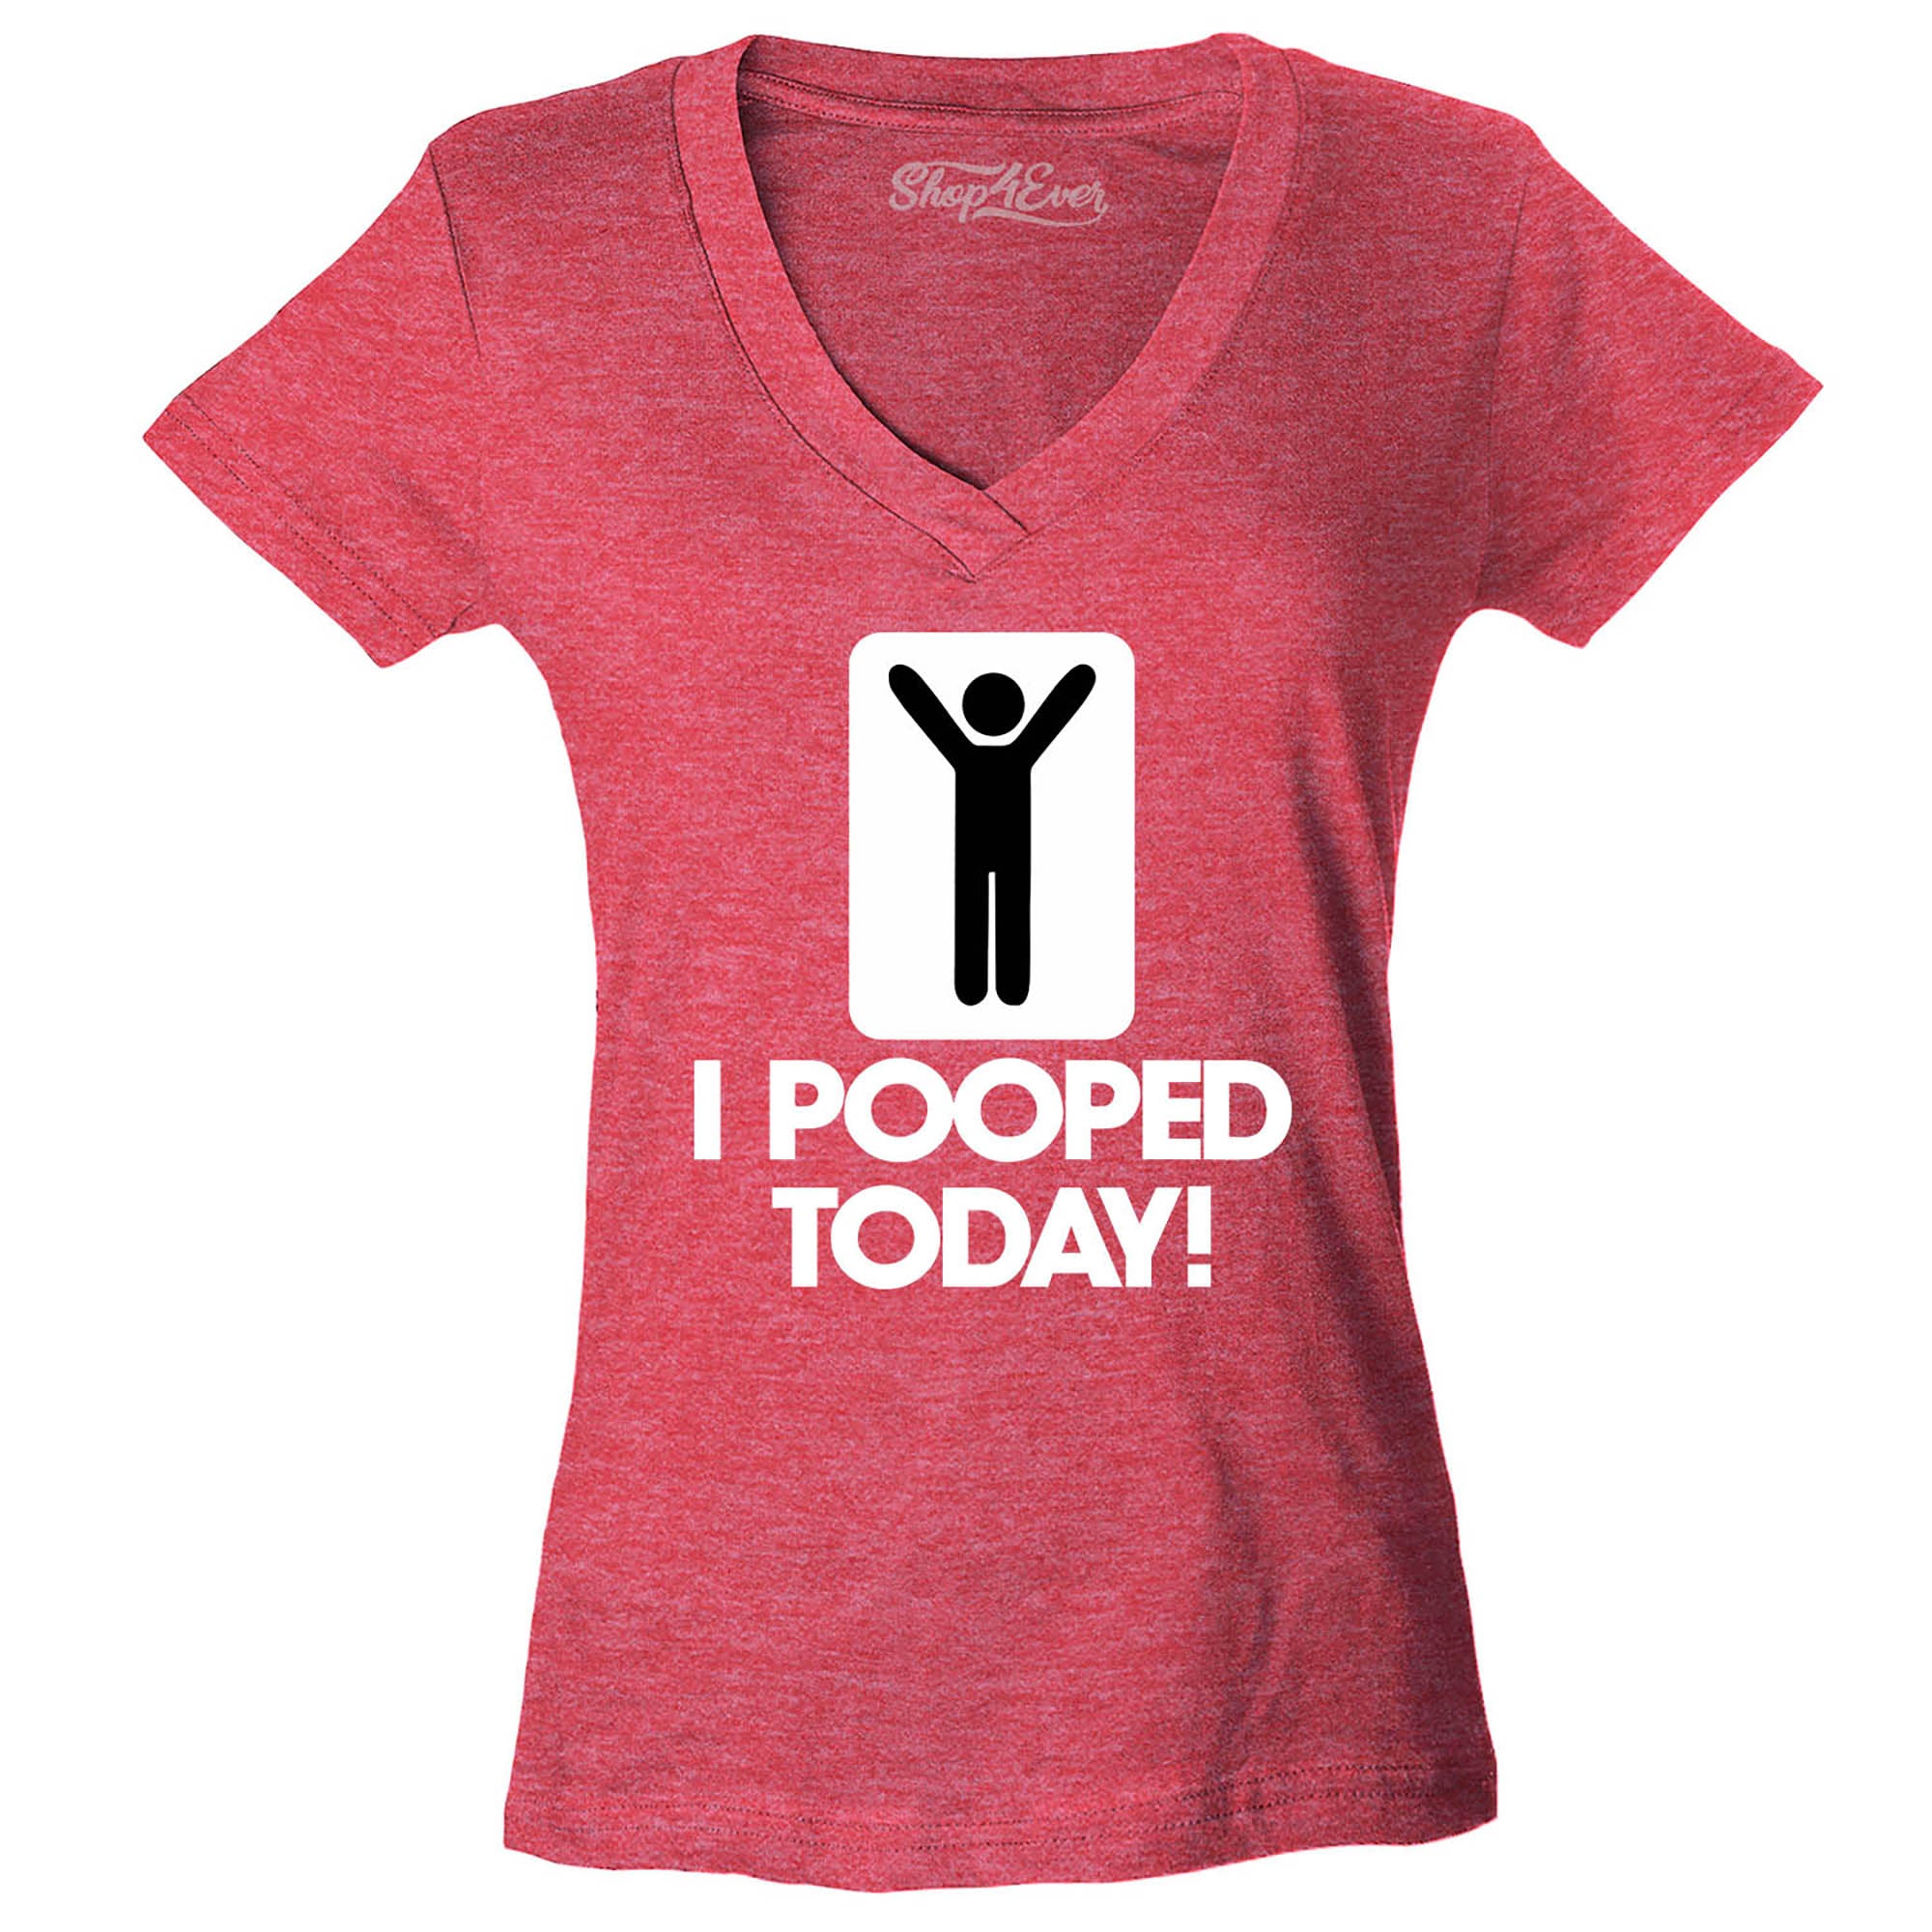 I Pooped Today Women's V-Neck T-Shirt Funny Shirts Slim FIT